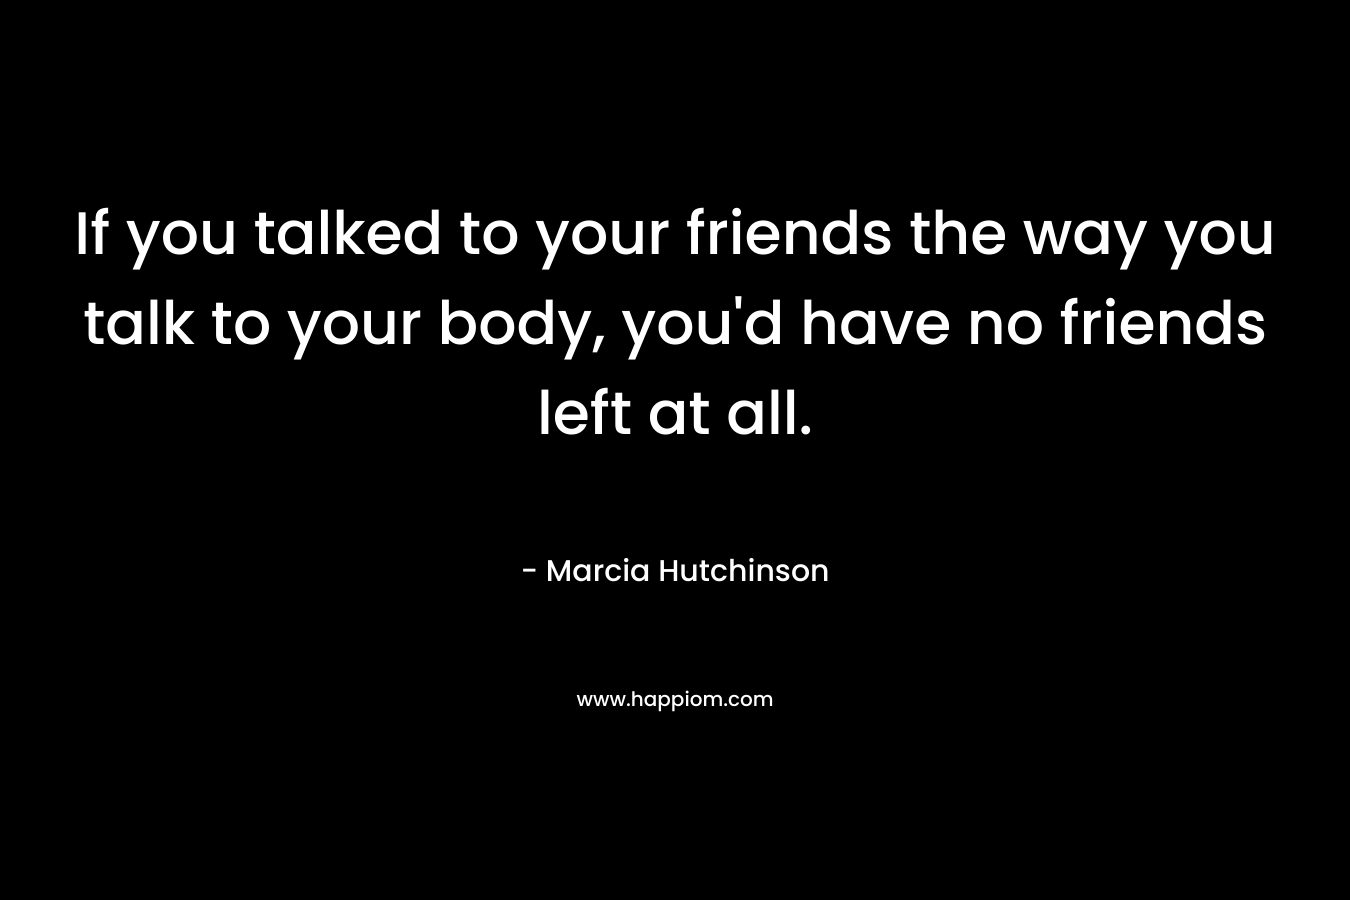 If you talked to your friends the way you talk to your body, you'd have no friends left at all.